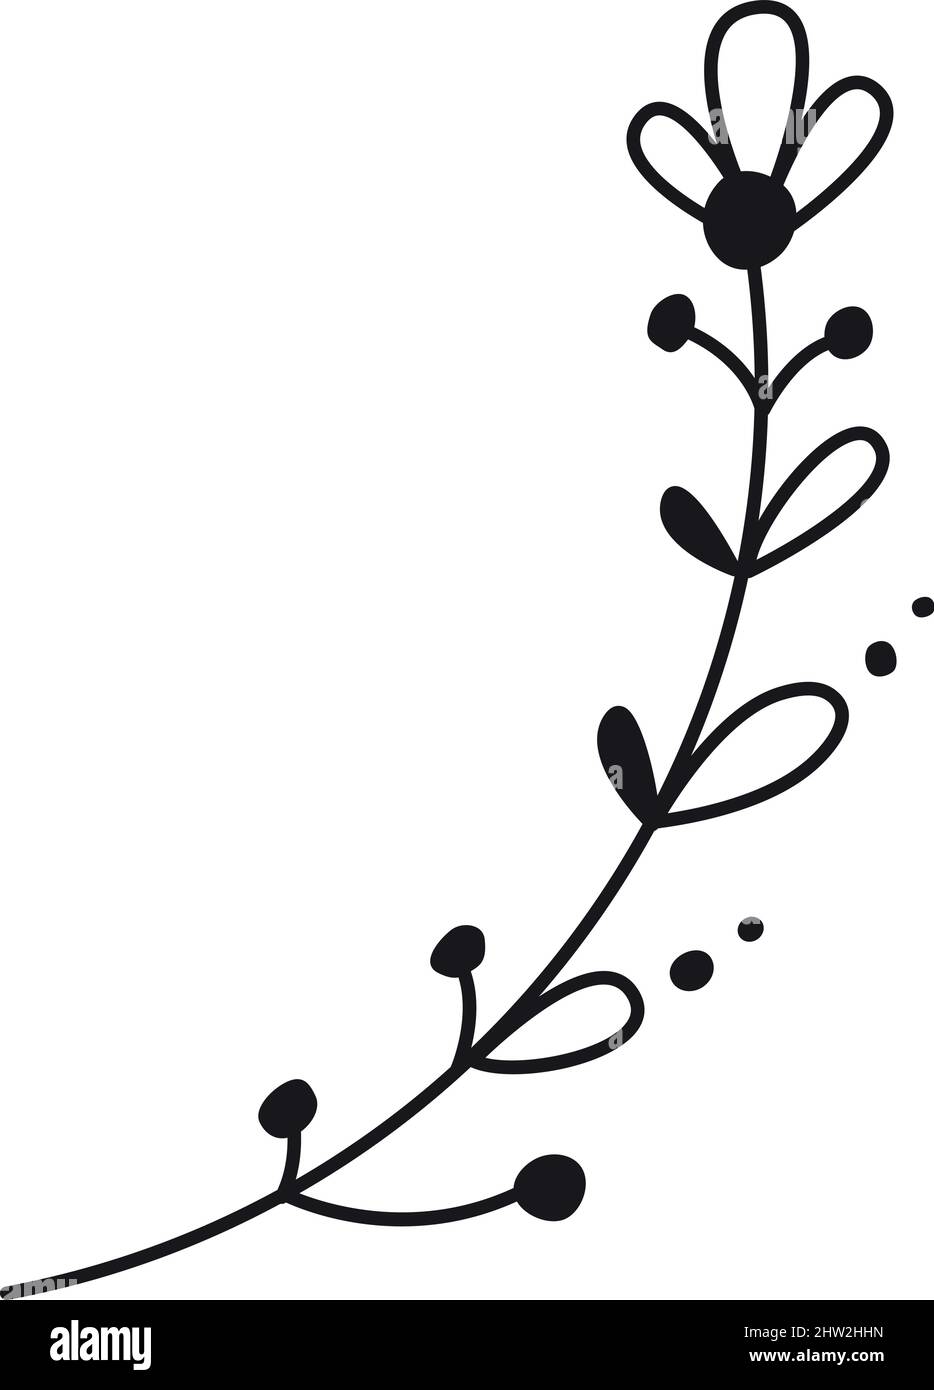 Branch doodle. Floral motif element in hand drawn style Stock Vector